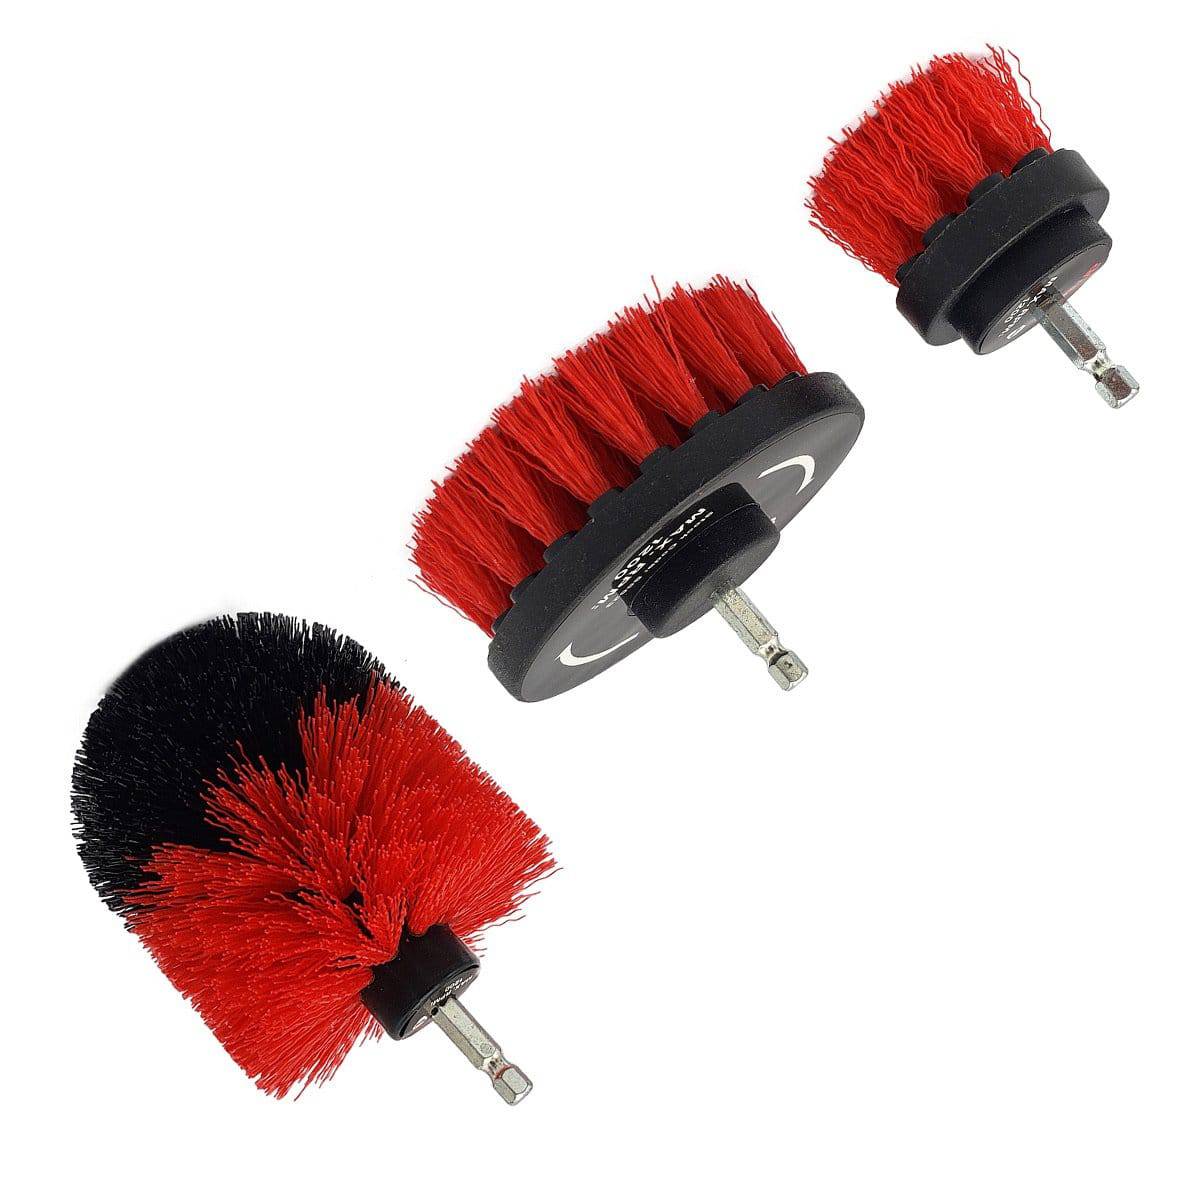 Amtrch Drill Brush Set - Just Car Care 